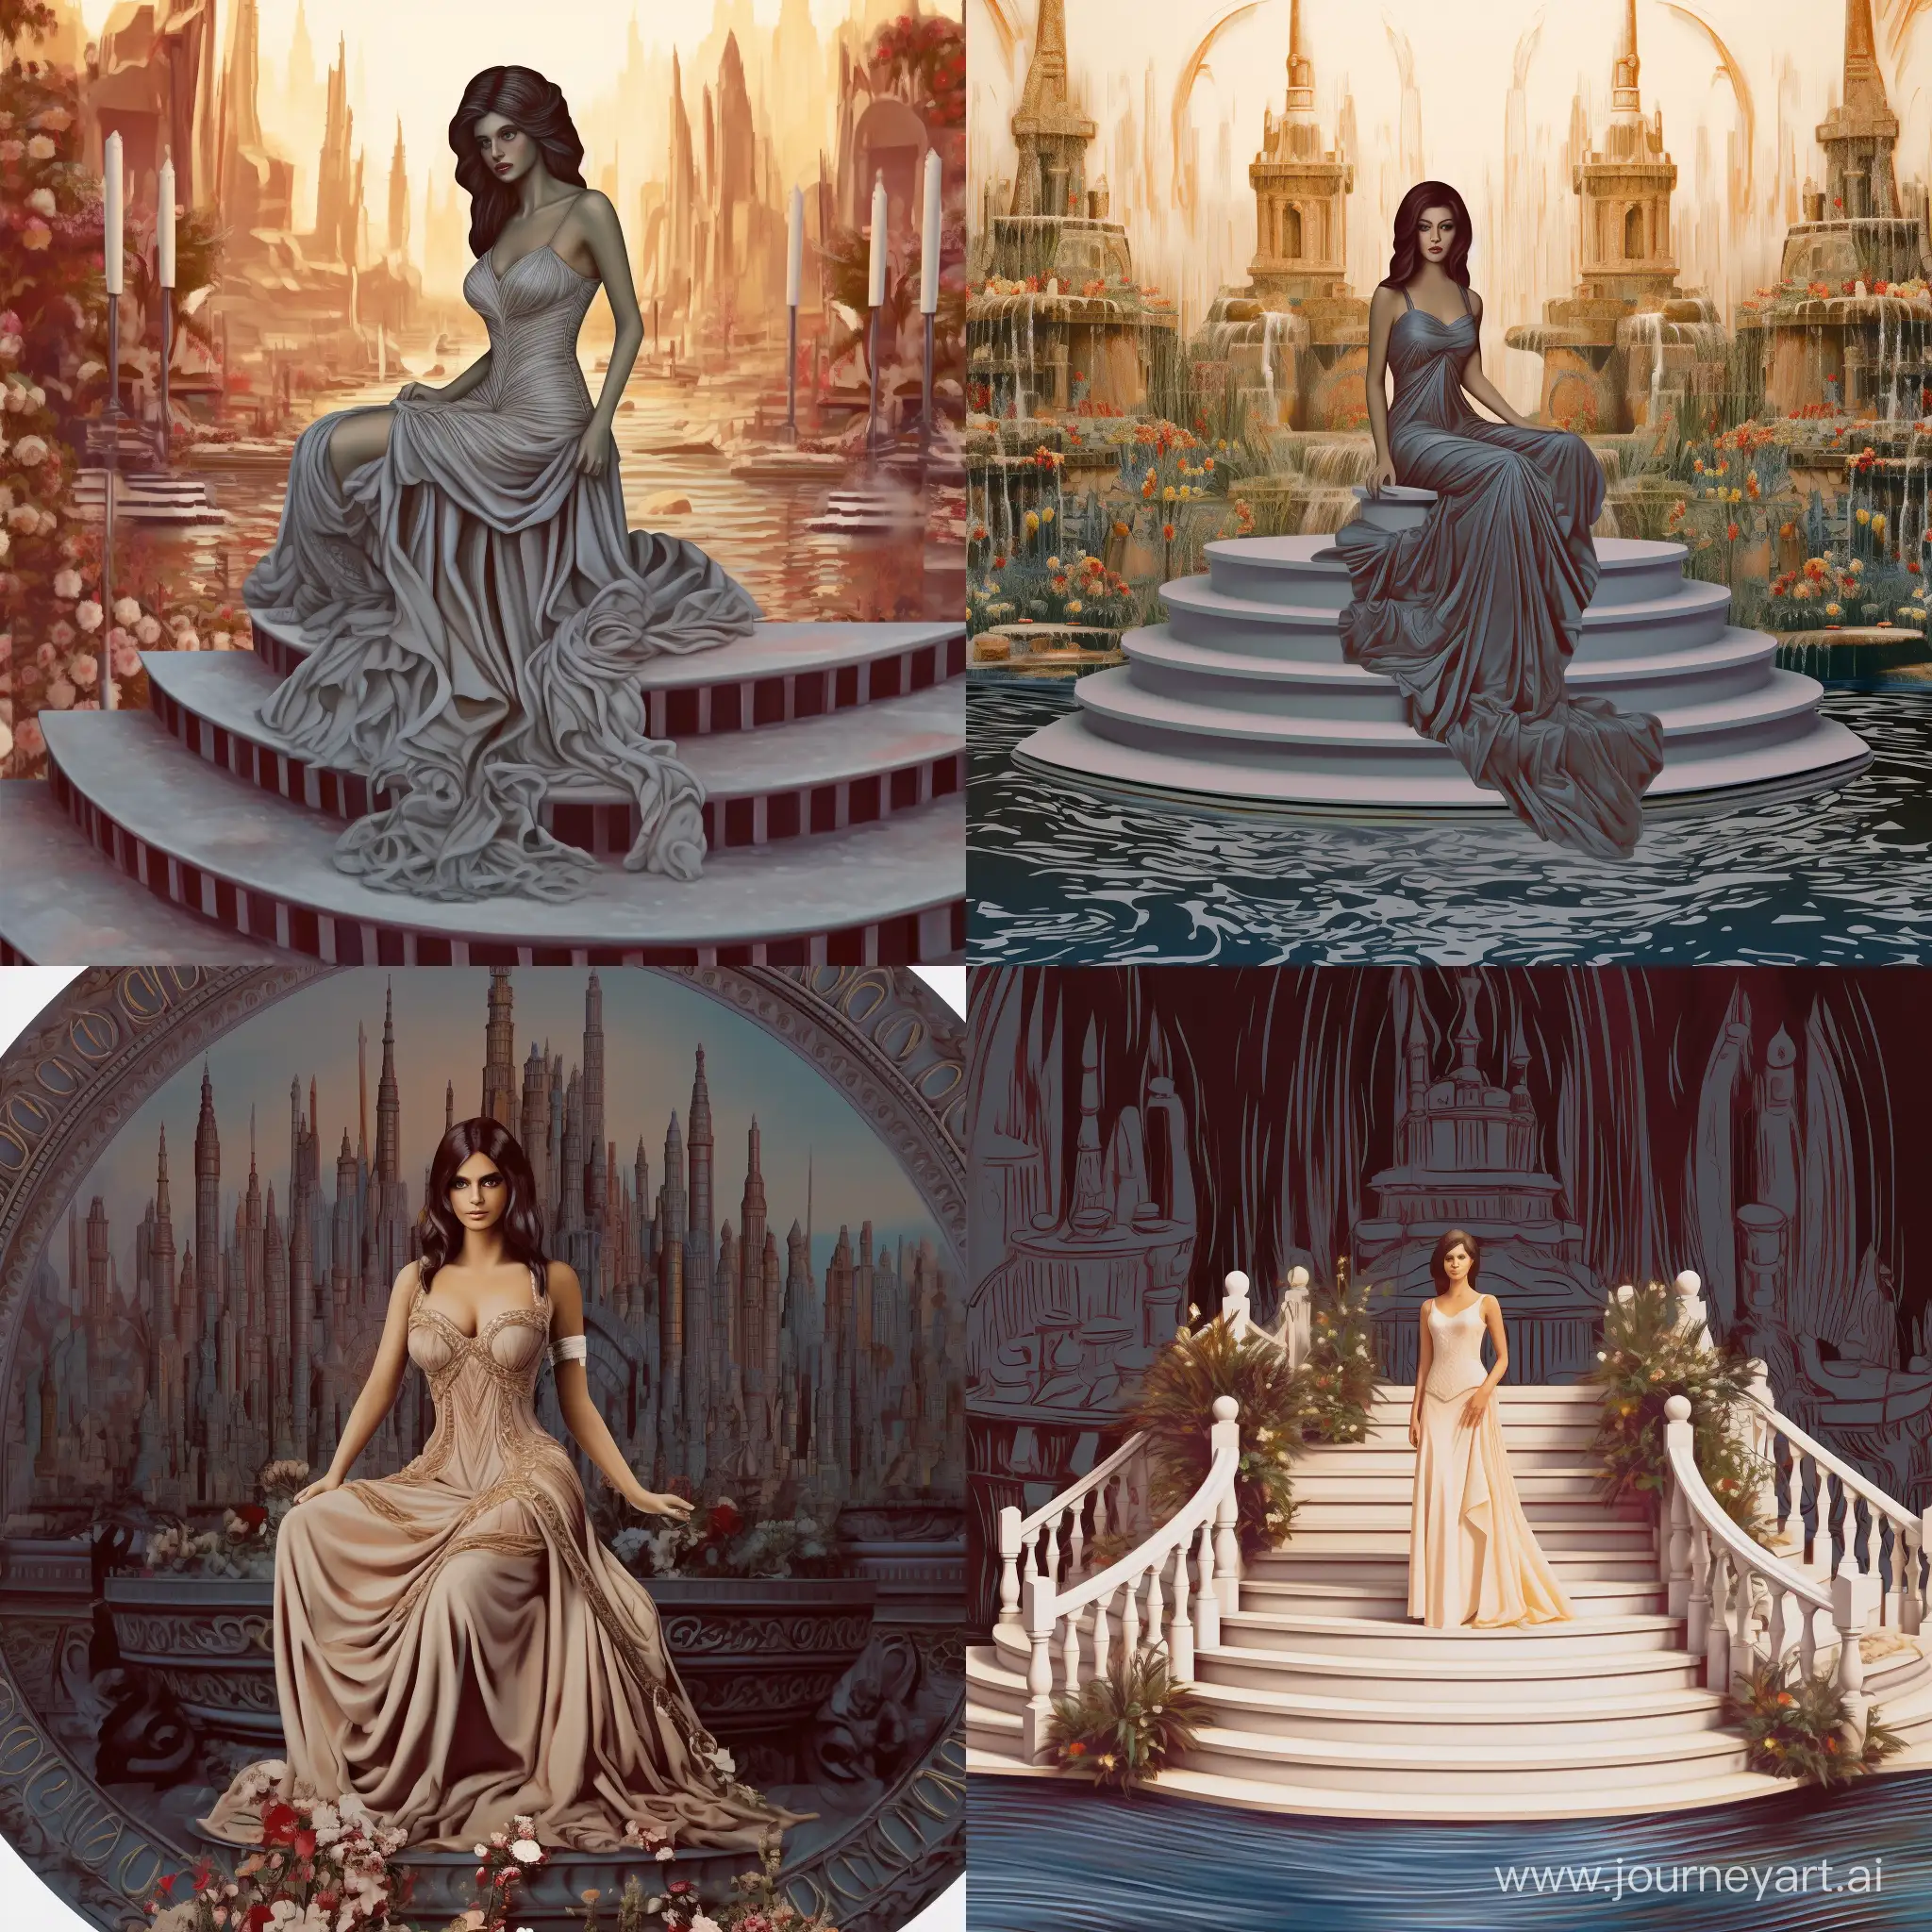 Stjepan Sejic’s painting of Kylie Jenner as Princess Arianne Martell in an exotic garden with fountains, wearing exotic robes and jewellery. curvaceous build, toned figure, belly piercing, mischievous expression. DnD style fantasy art.